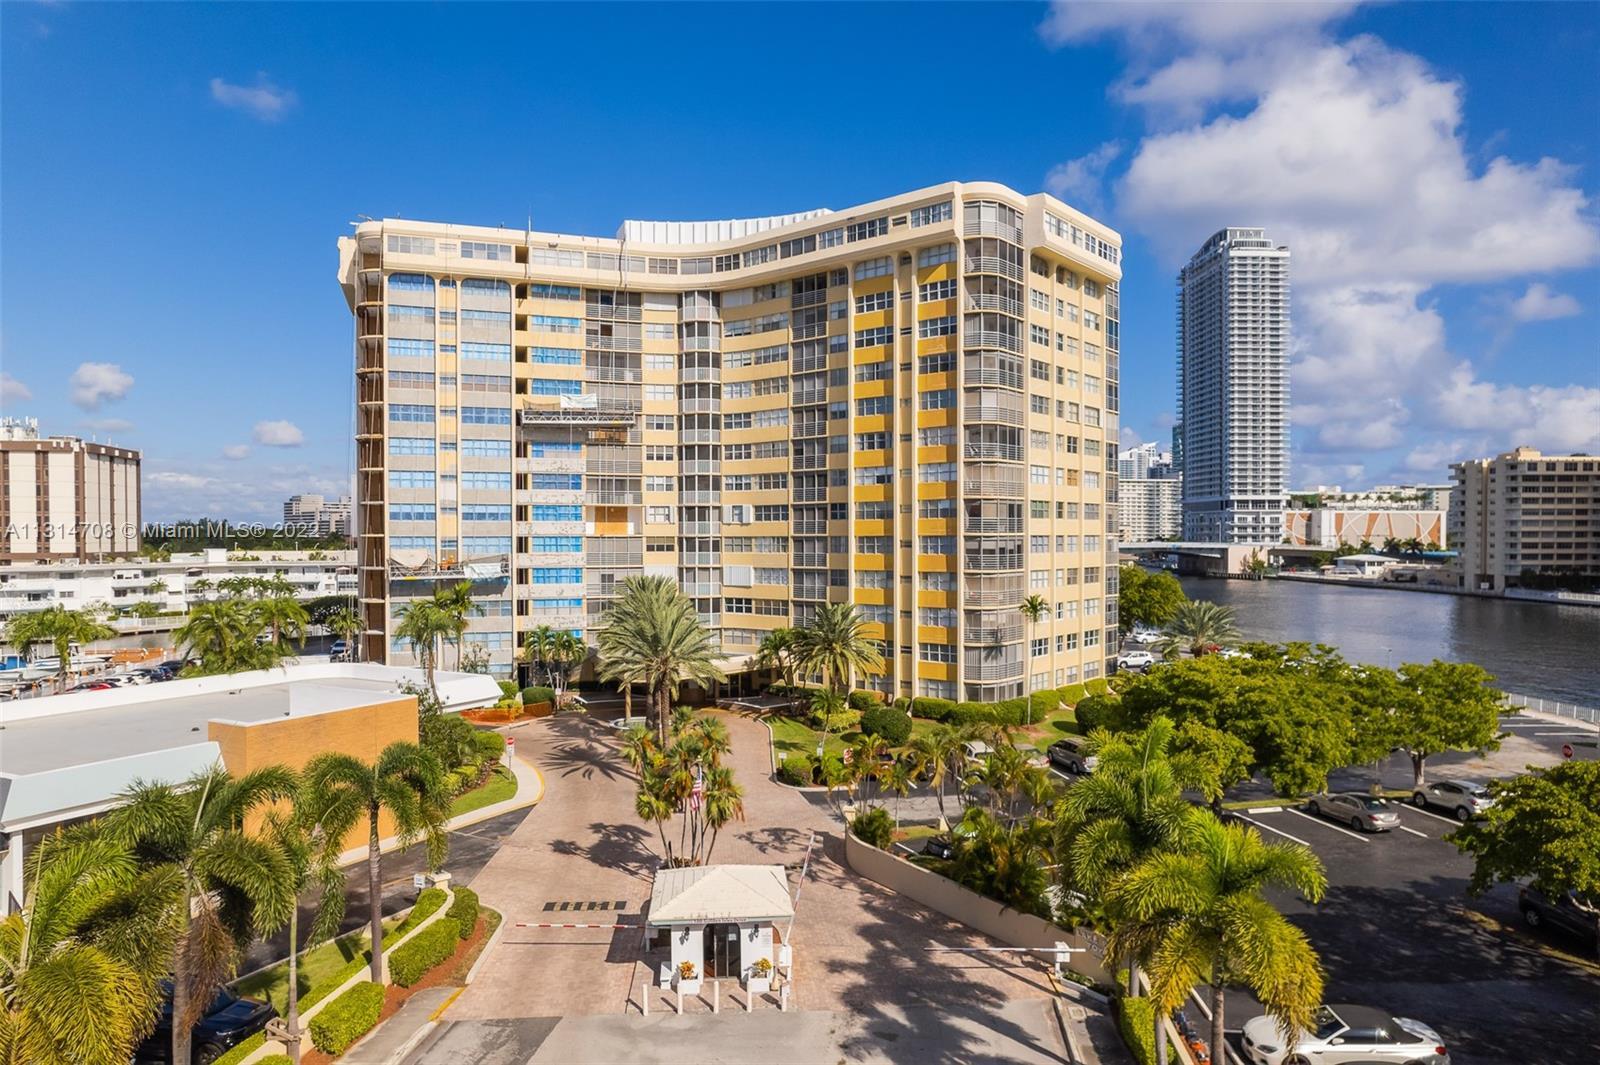 Classic Waterfront Style in this Mid-Century Modern High Rise!  On the tip of Golden Isles Drive, th